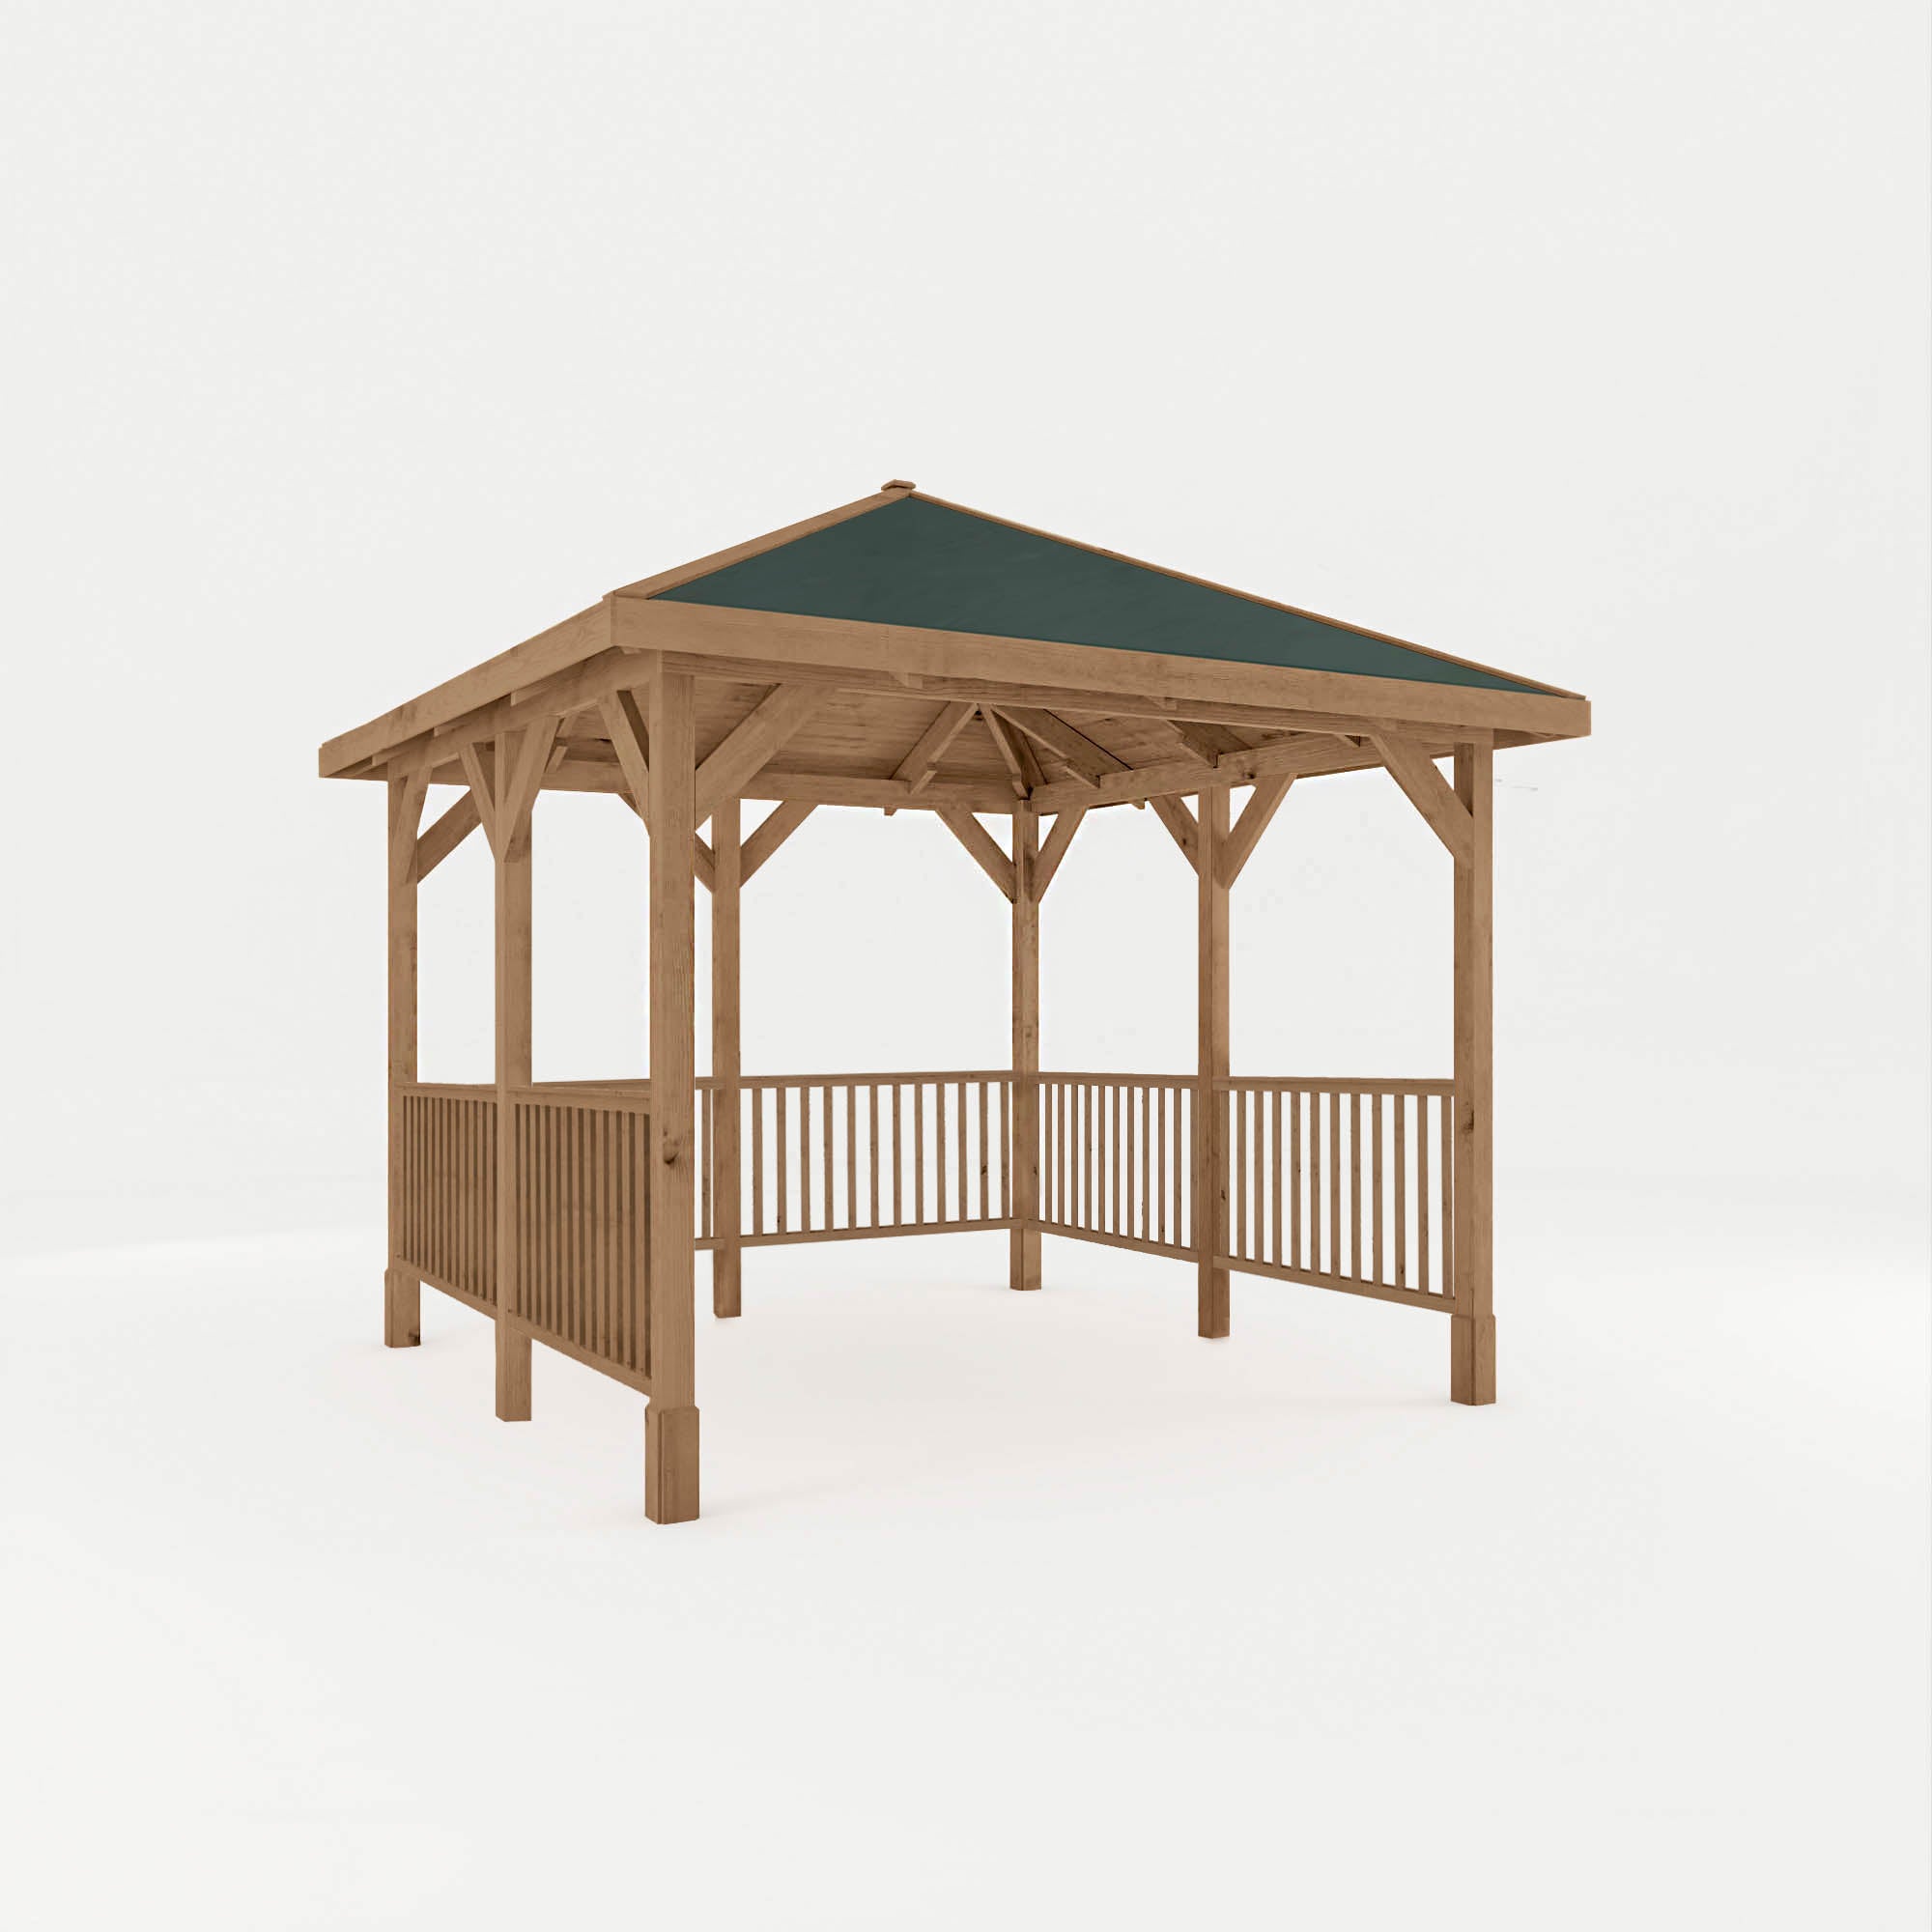 3m x 3m Pressure Treated Gazebo with Roof and Framed Rails